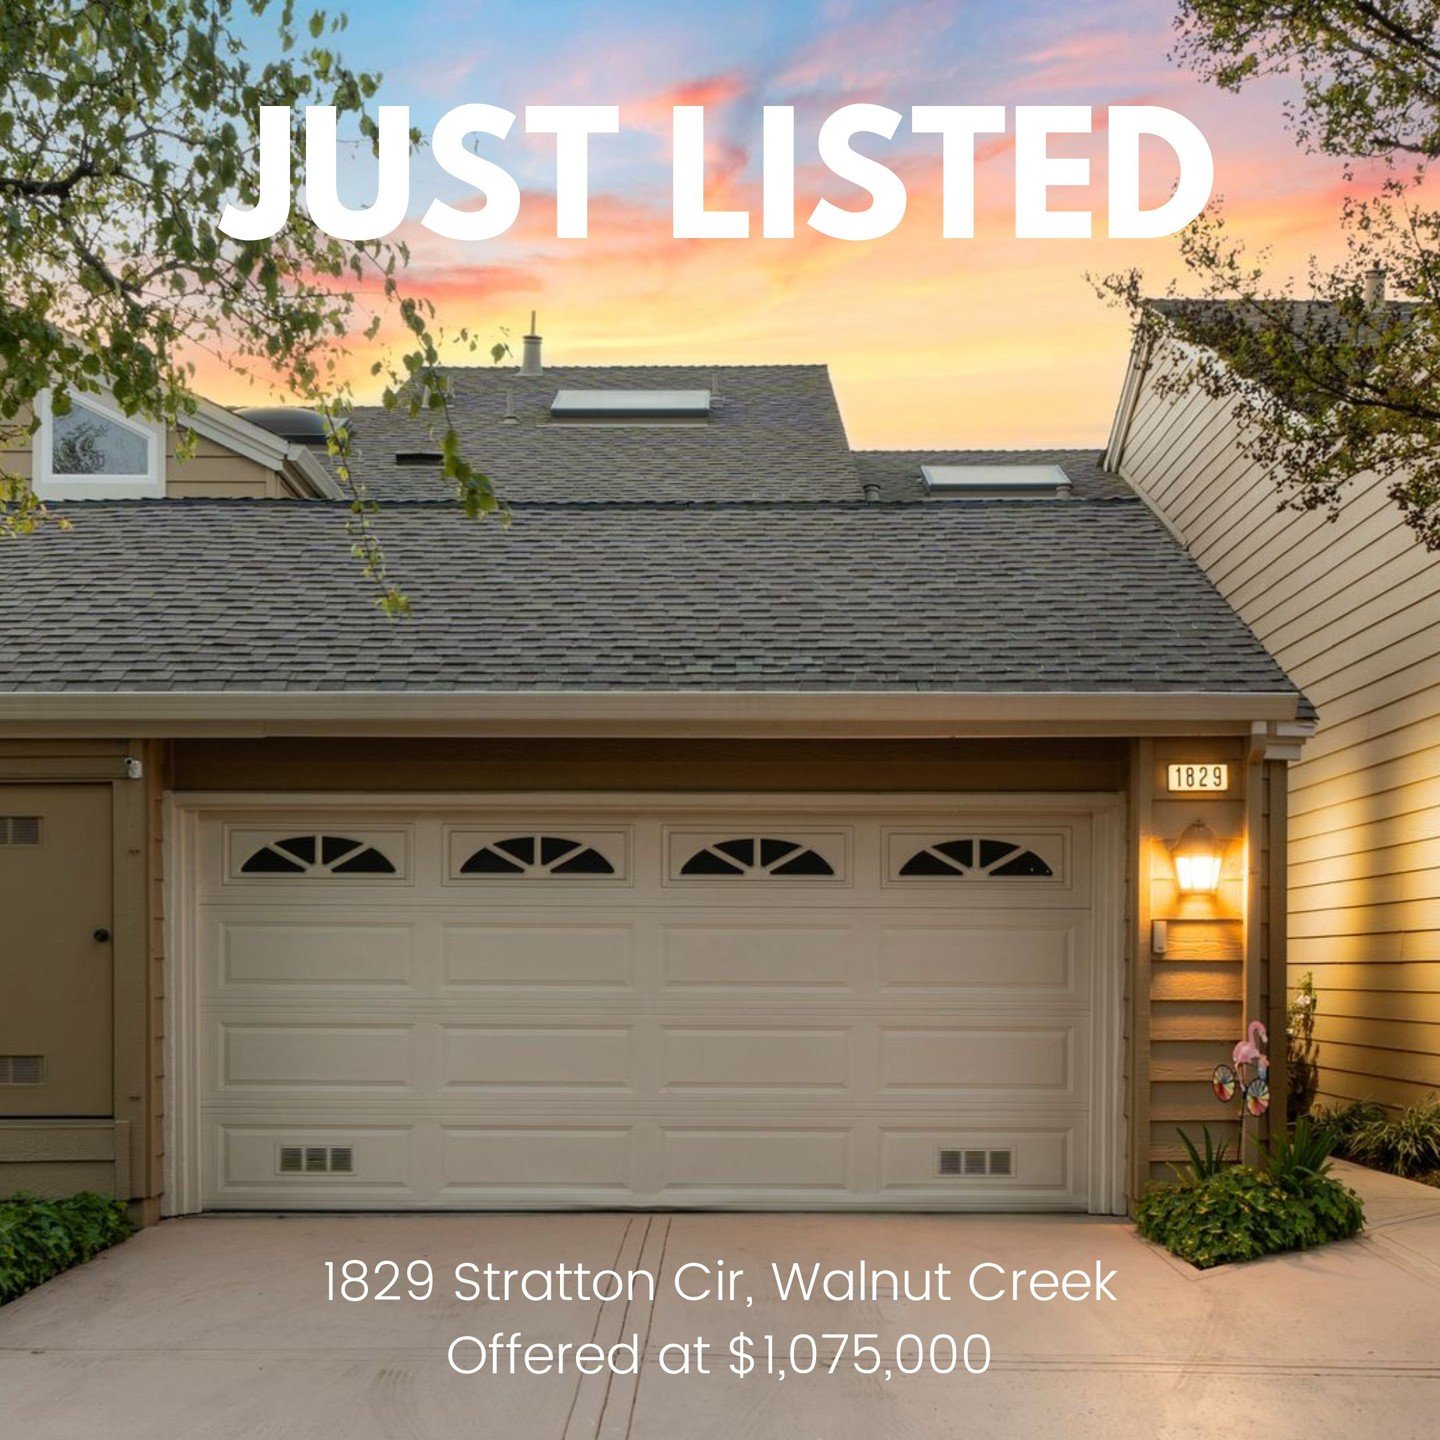 Looking for an ideal and central Walnut Creek location + updates throughout? Then 1829 Stratton Circle is the perfect home for you!

Come see us this weekend for open houses, both Saturday and Sunday 1-4pm! If you prefer a private showing, give us a 